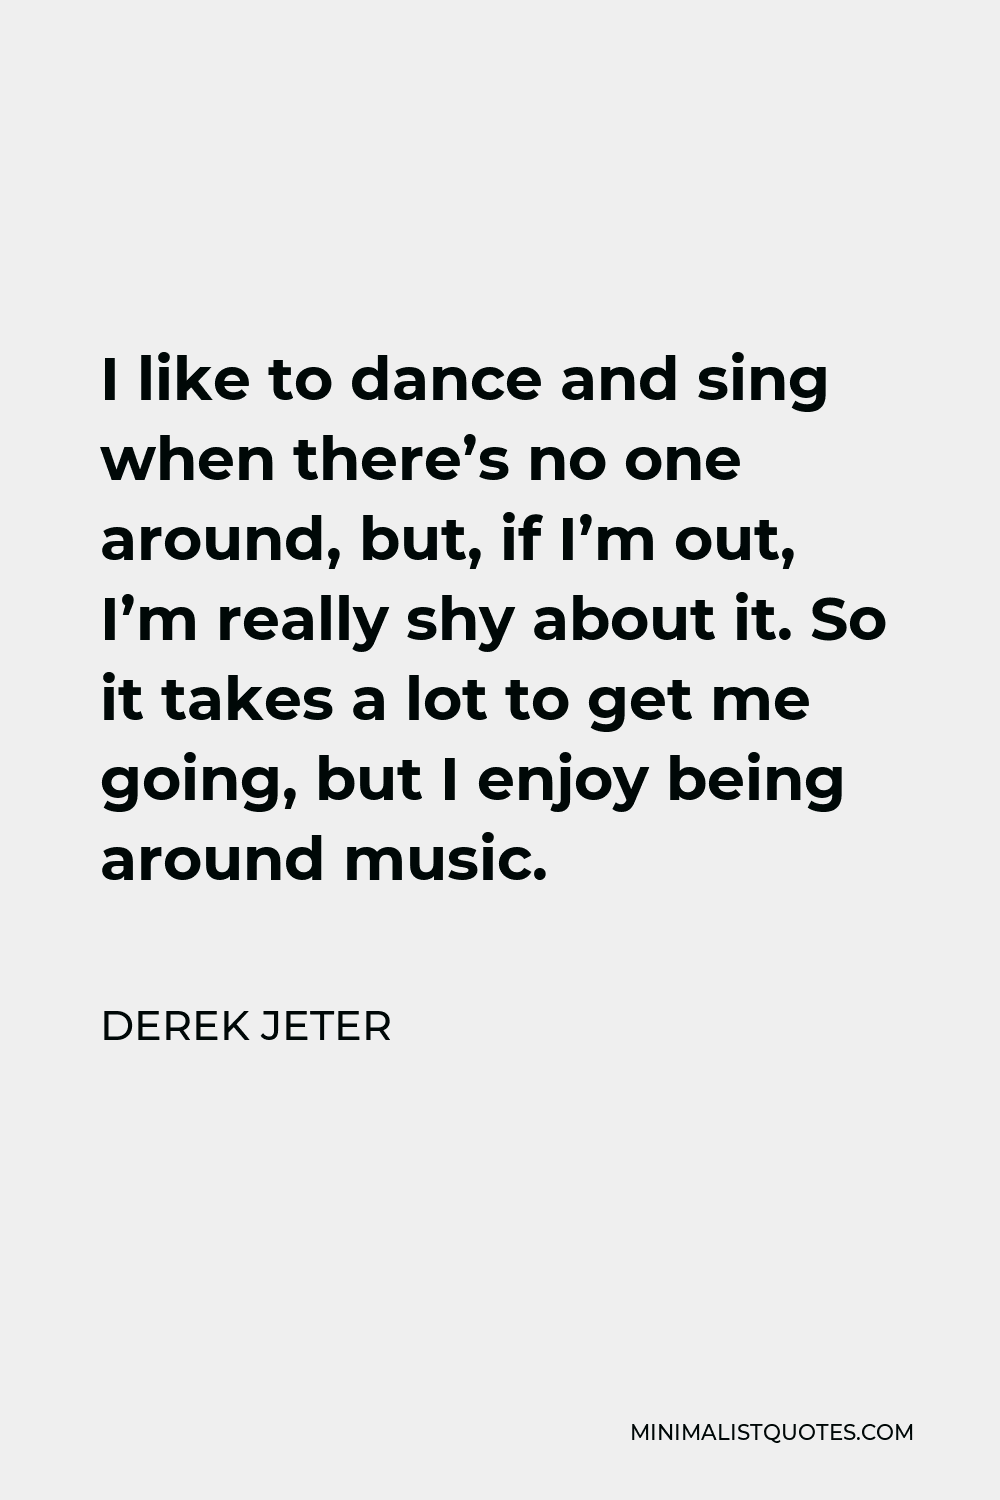 Derek Jeter Quote - I like to dance and sing when there’s no one around, but, if I’m out, I’m really shy about it. So it takes a lot to get me going, but I enjoy being around music.